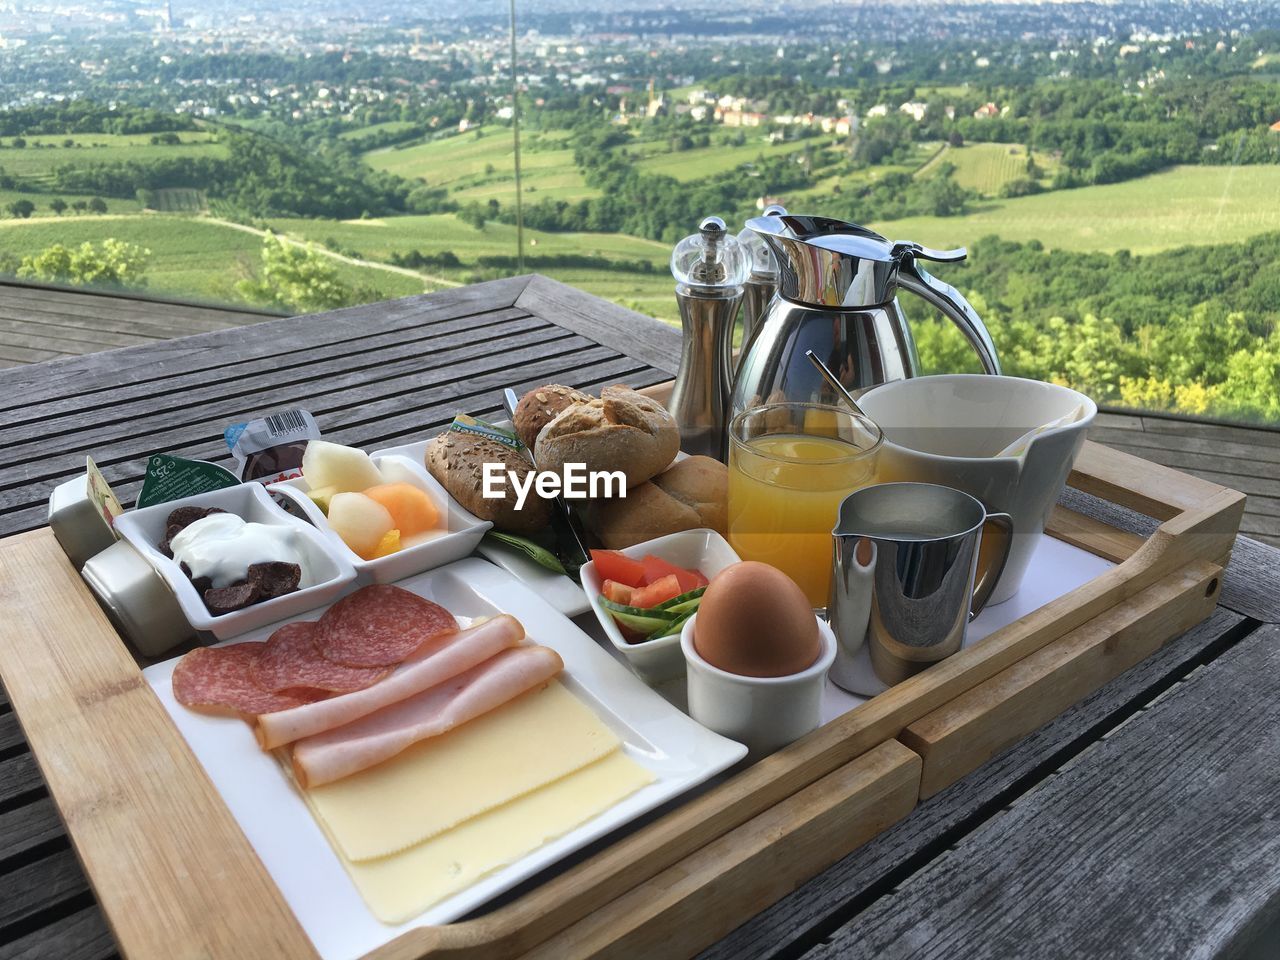 VIEW OF BREAKFAST AND TABLE